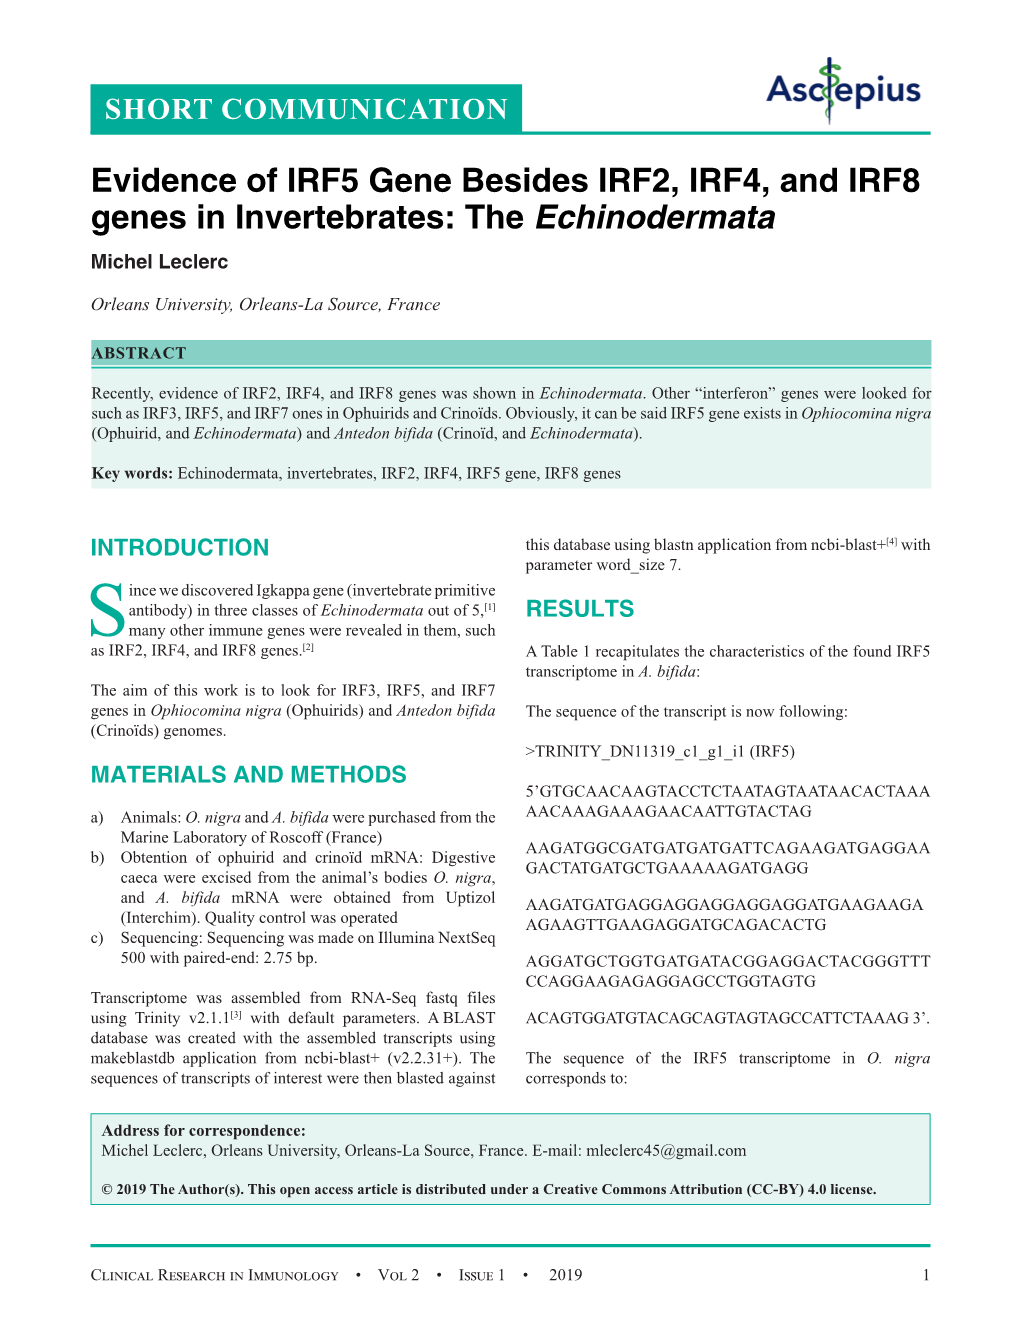 Evidence of IRF5 Gene Besides IRF2, IRF4, and IRF8 Genes in Invertebrates: the Echinodermata Michel Leclerc